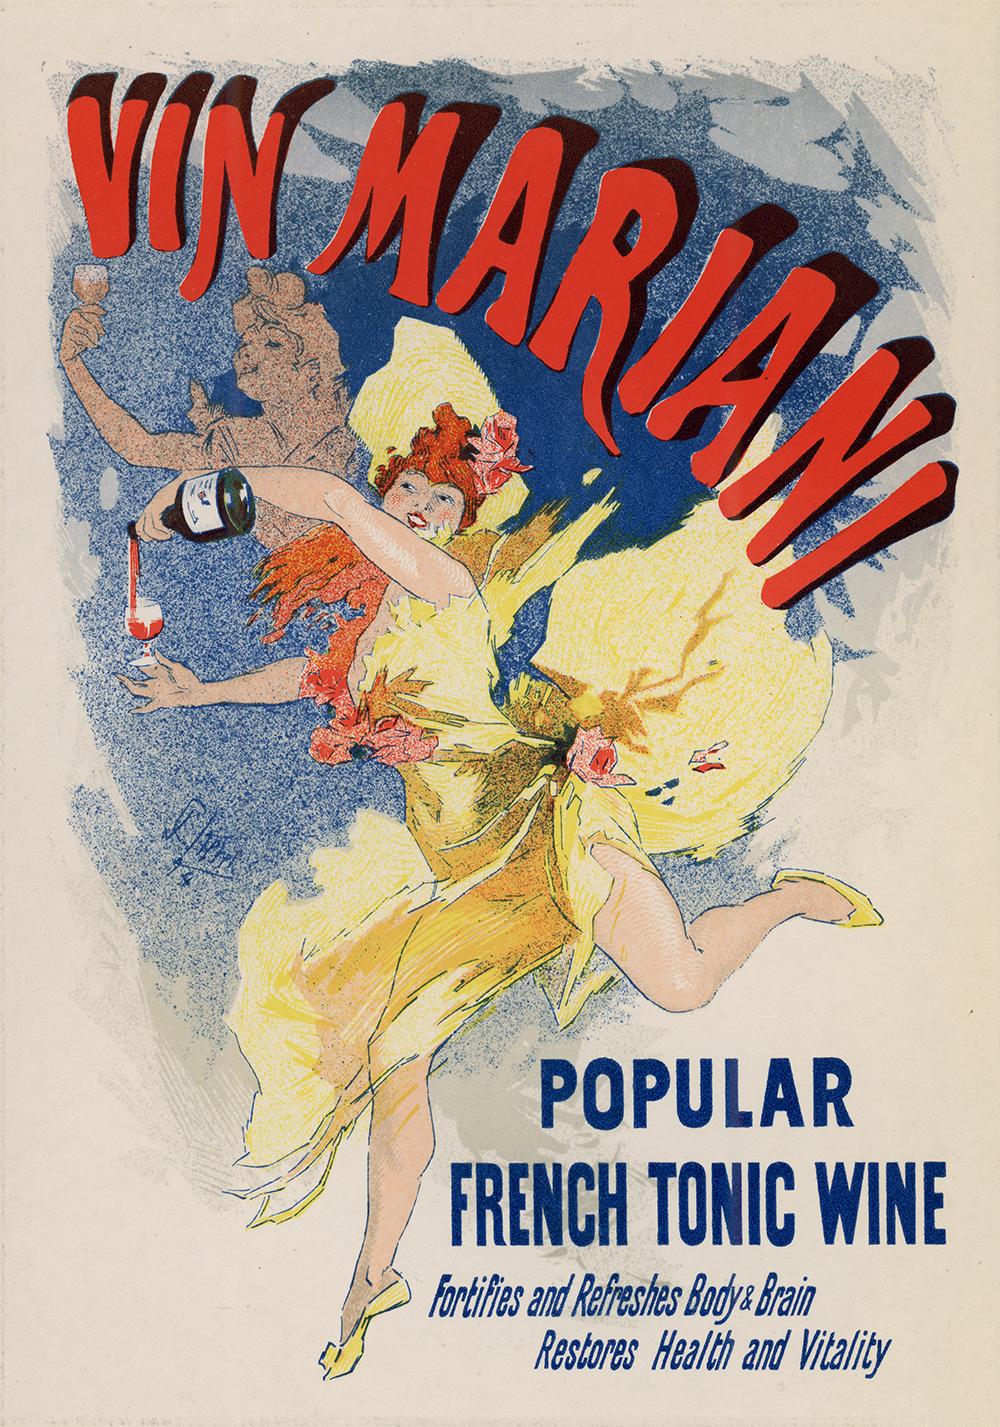 Vin Mariani was the world's first commercial cocaine-based product, pre-dating the notorious cocaine-based soda Coca Cola by over two decades. The stimulating elixir was so popular that the manufacturer published a book containing its vast amounts